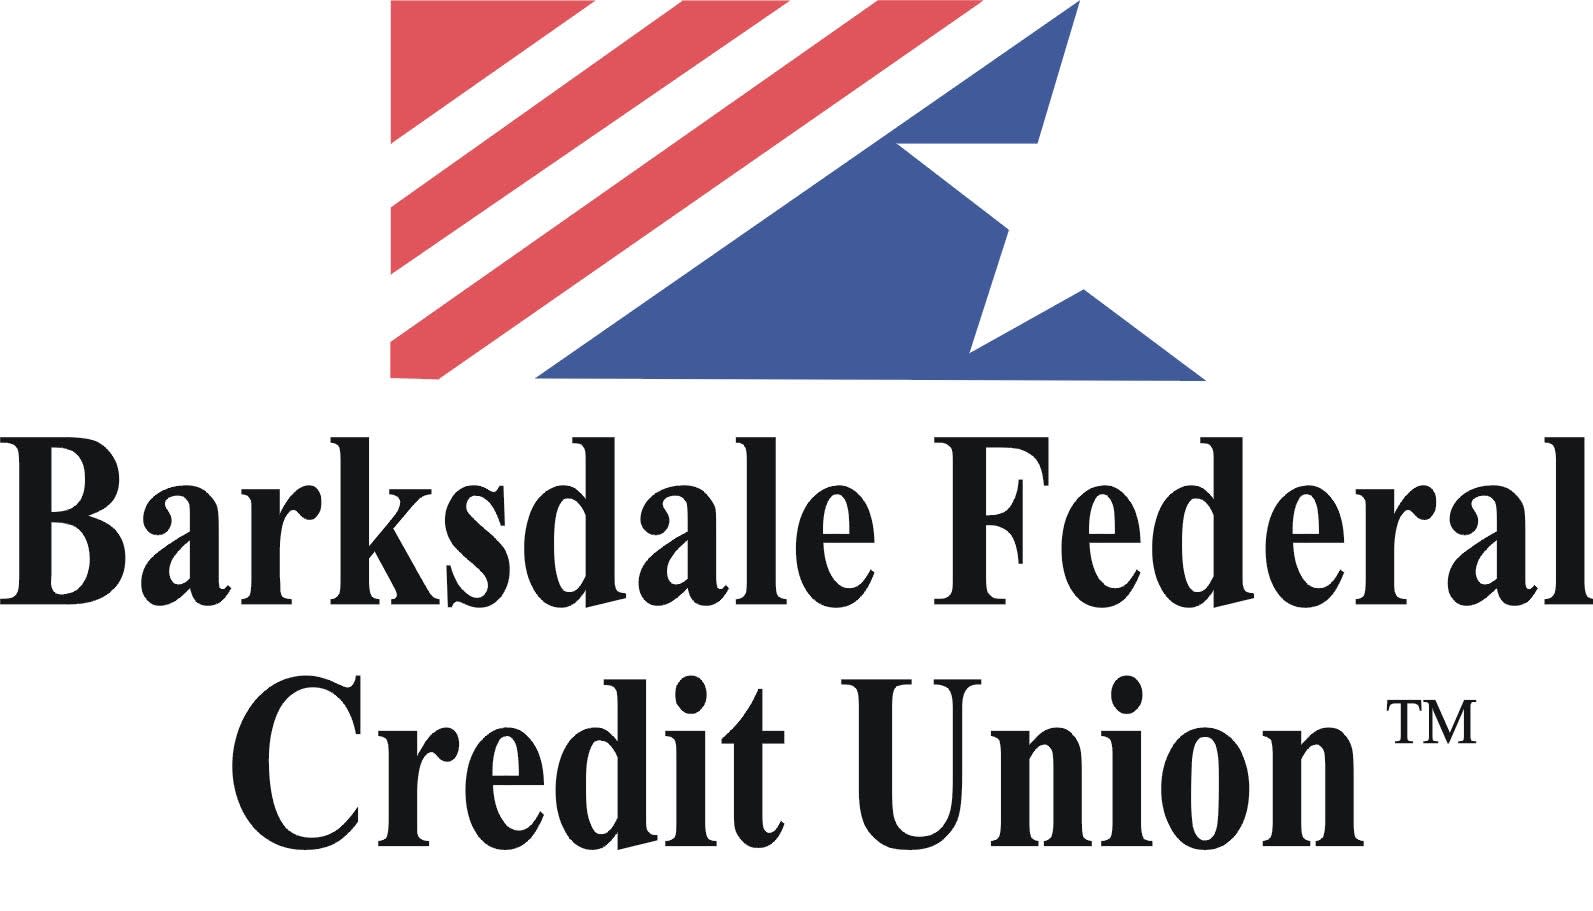 Barksdale Federal Credit Union-Mansfield Road Center